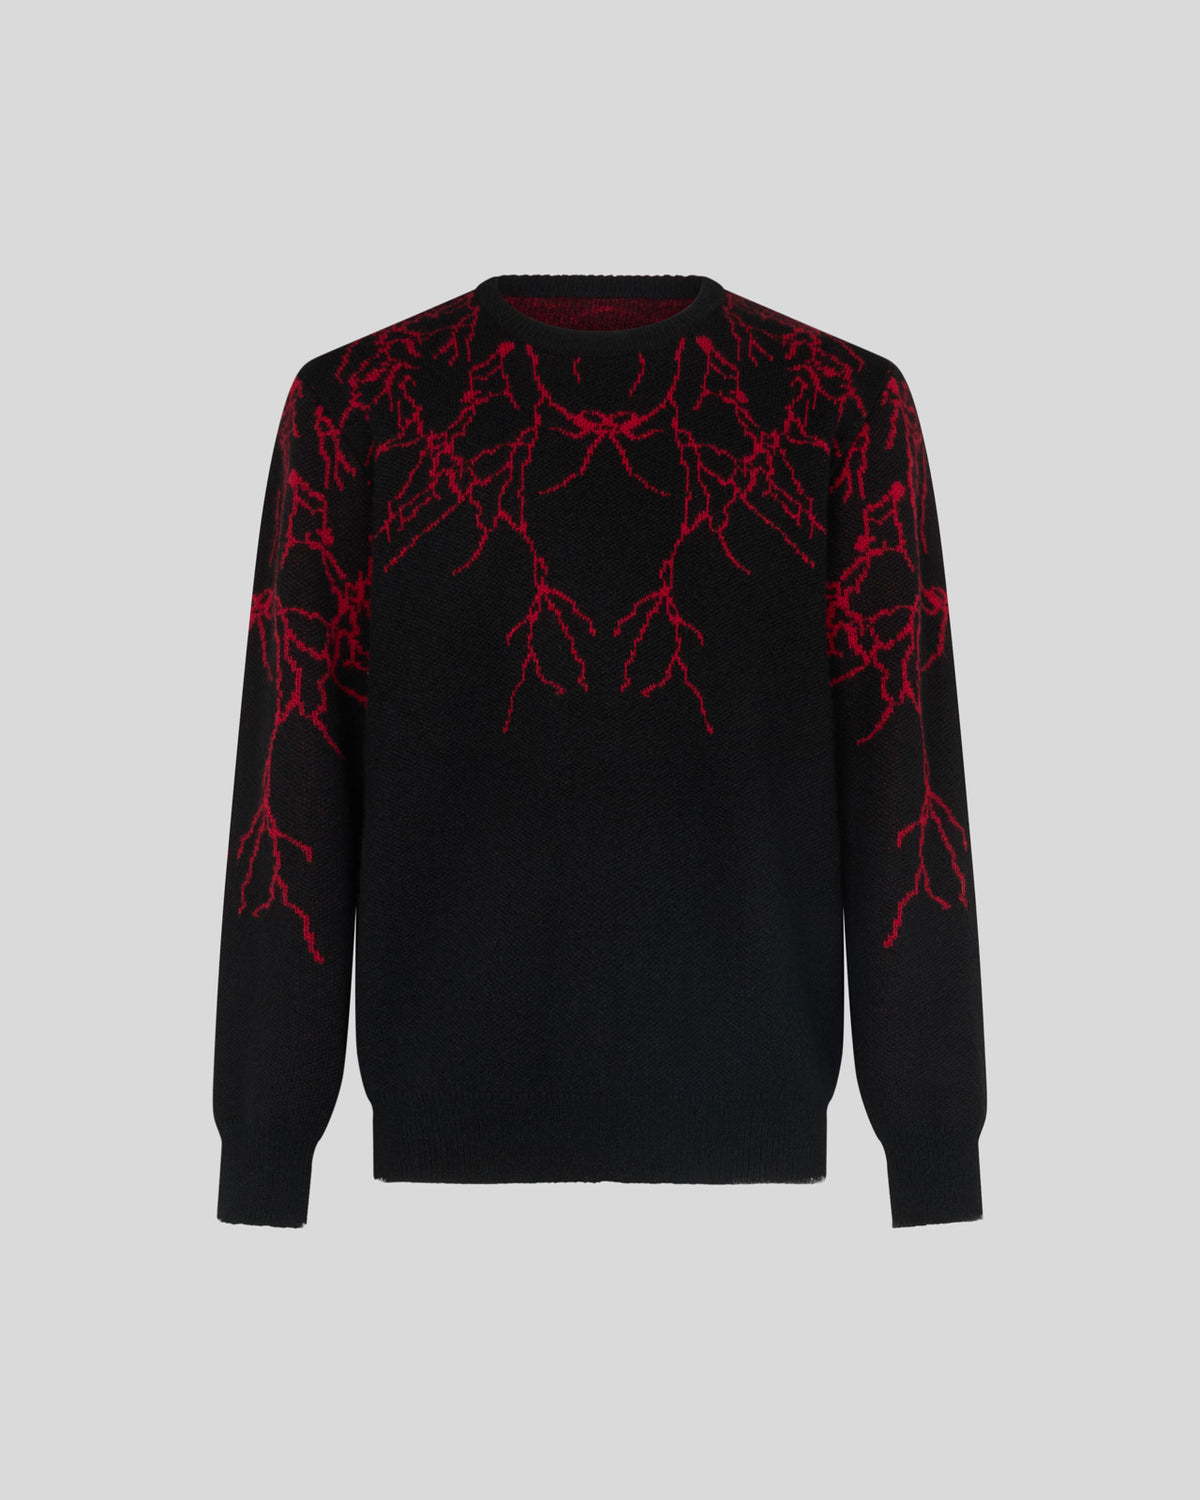 PHOBIA BLACK JUMPER WITH RED LIGHTNING